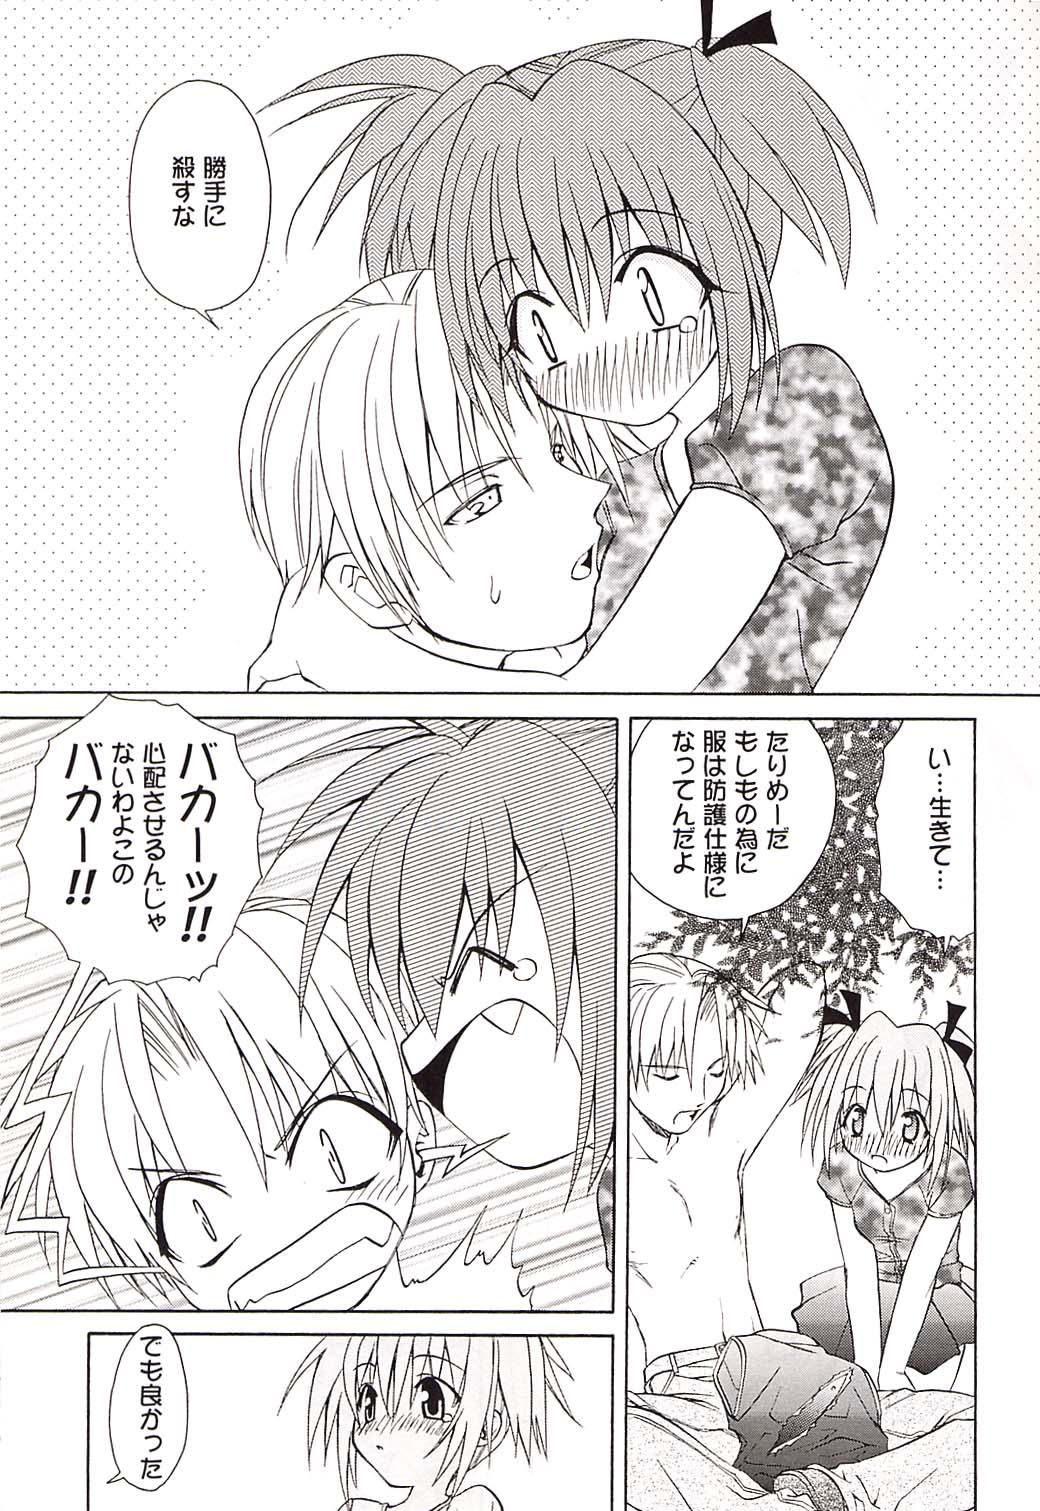 Yanks Featured Strawberry sex - Tokyo mew mew Beard - Page 12